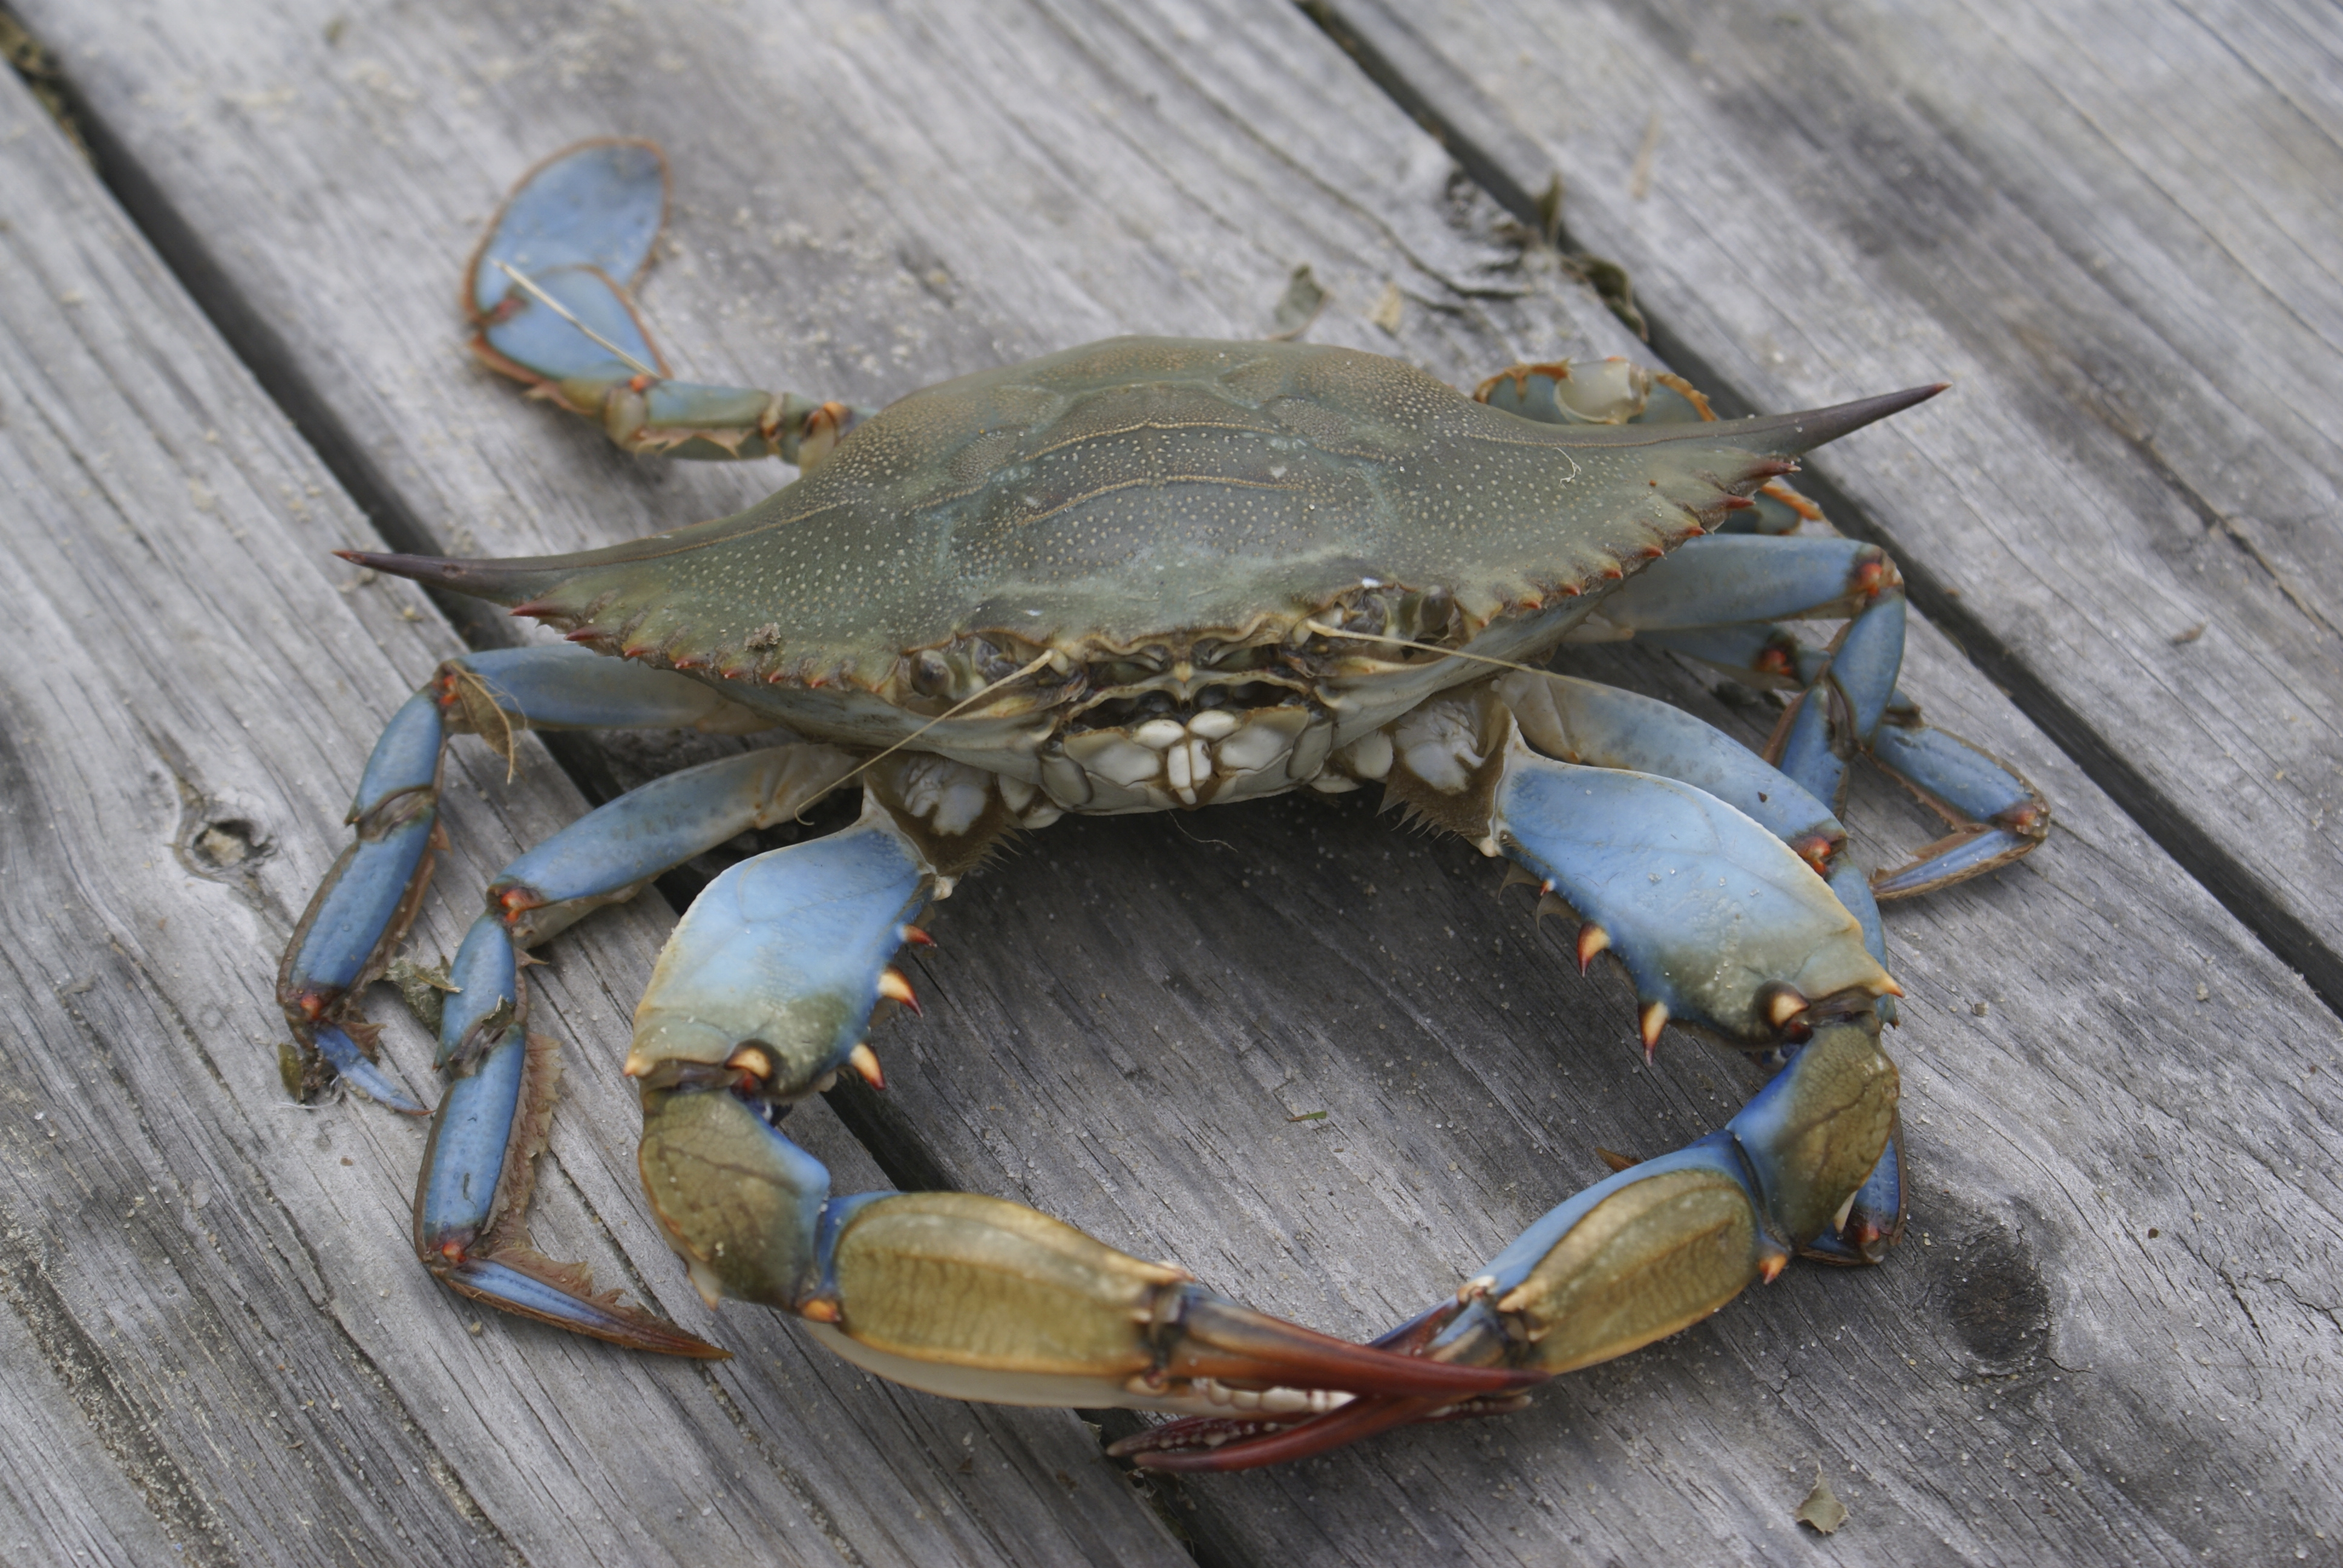 The Sacred Maryland Blue Crab | Penn State - Presidential Leadership